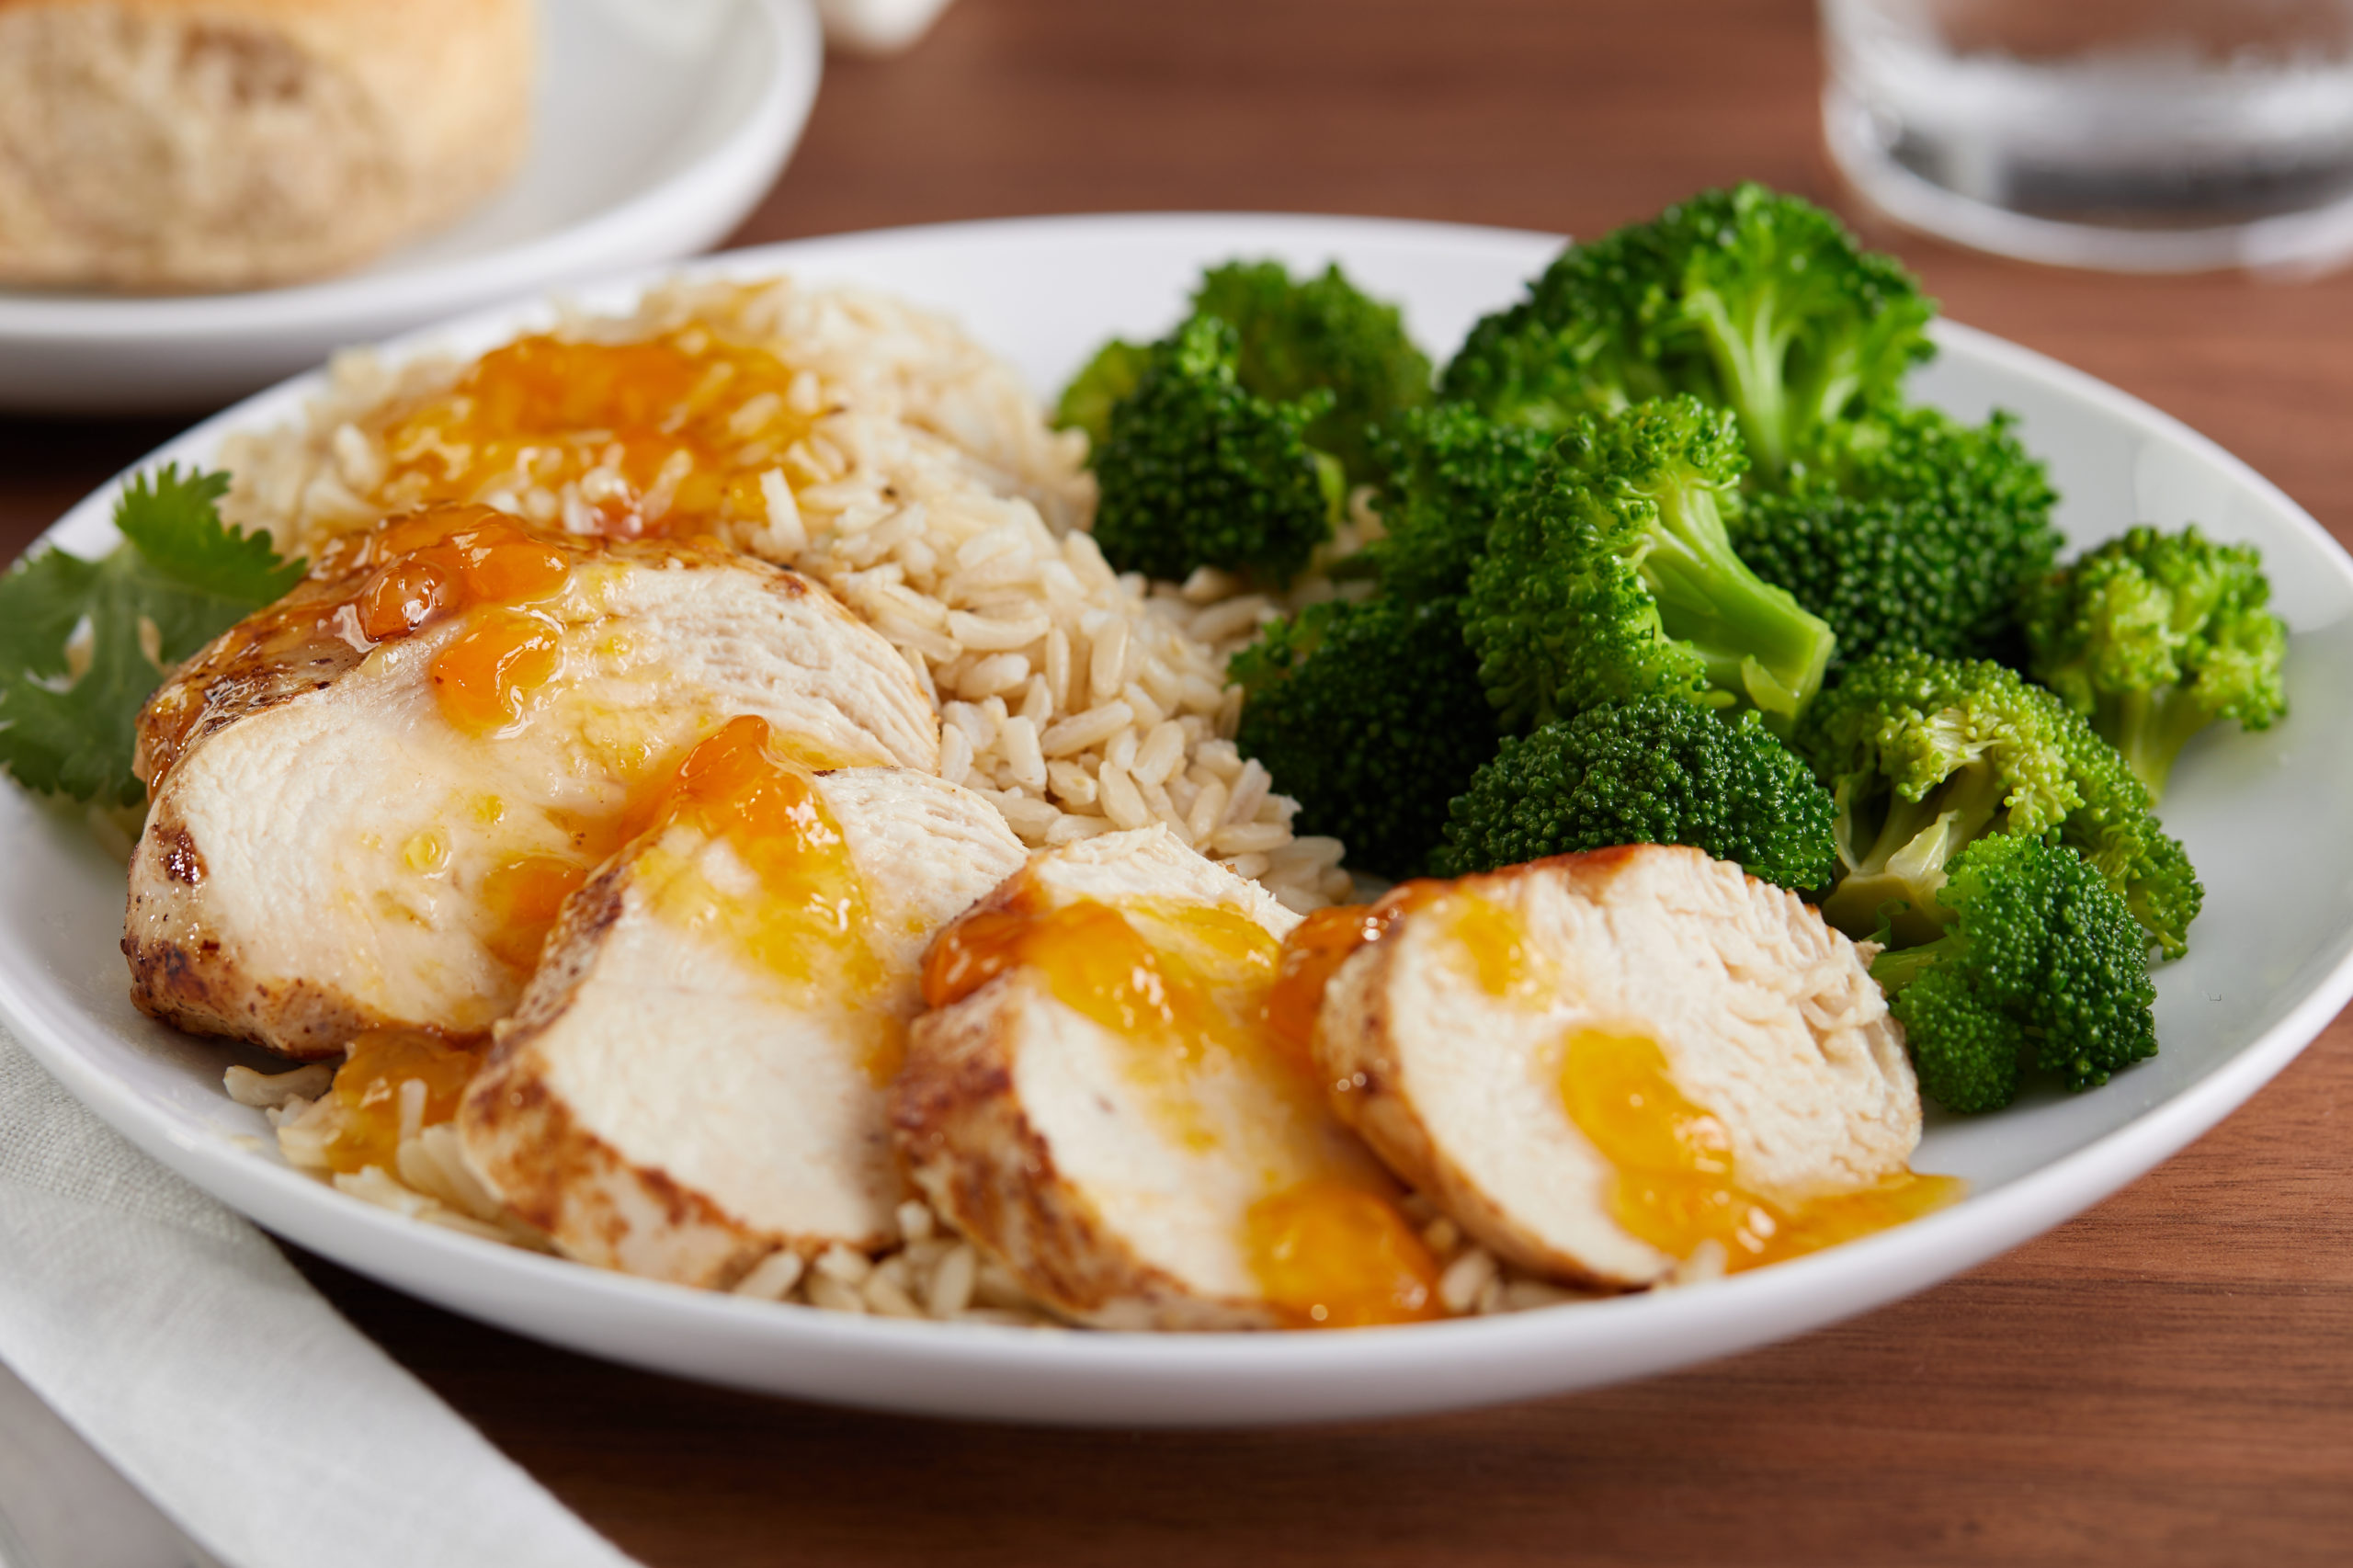 Orange chicken with rise and broccoli